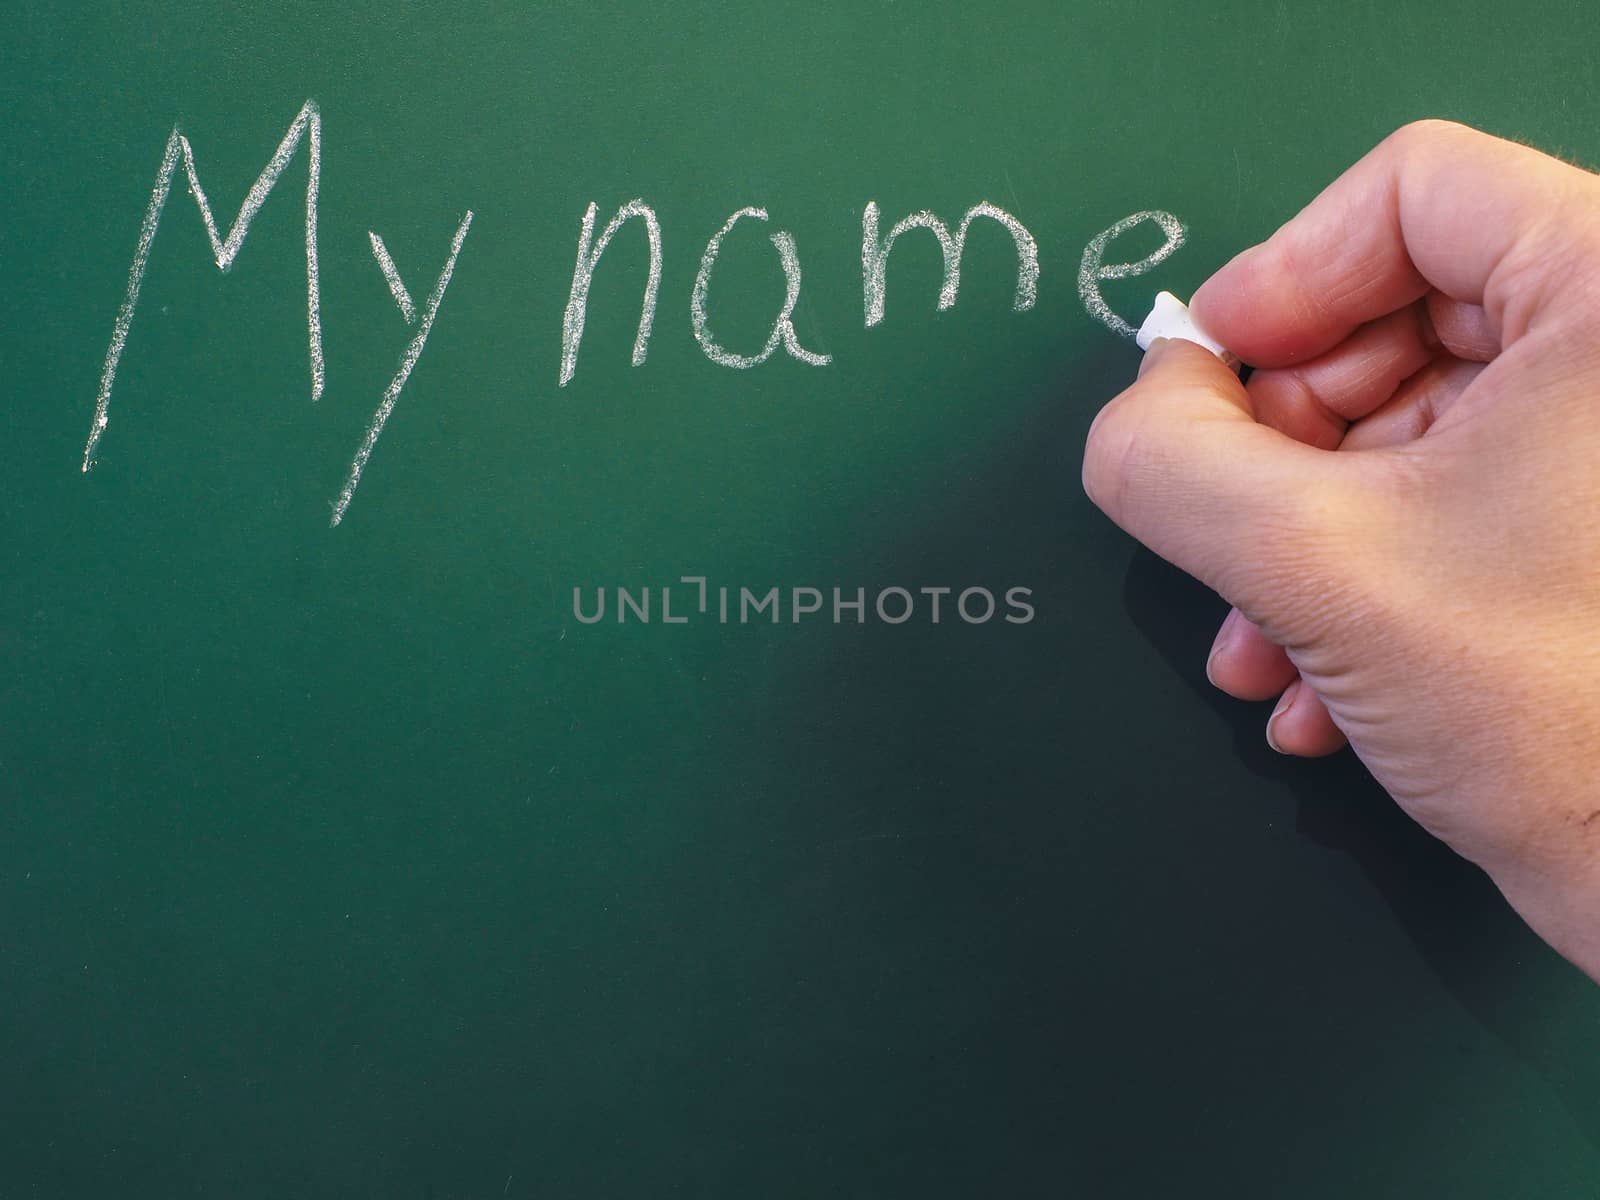 Person writing on green chalkboard; My name, with chalk